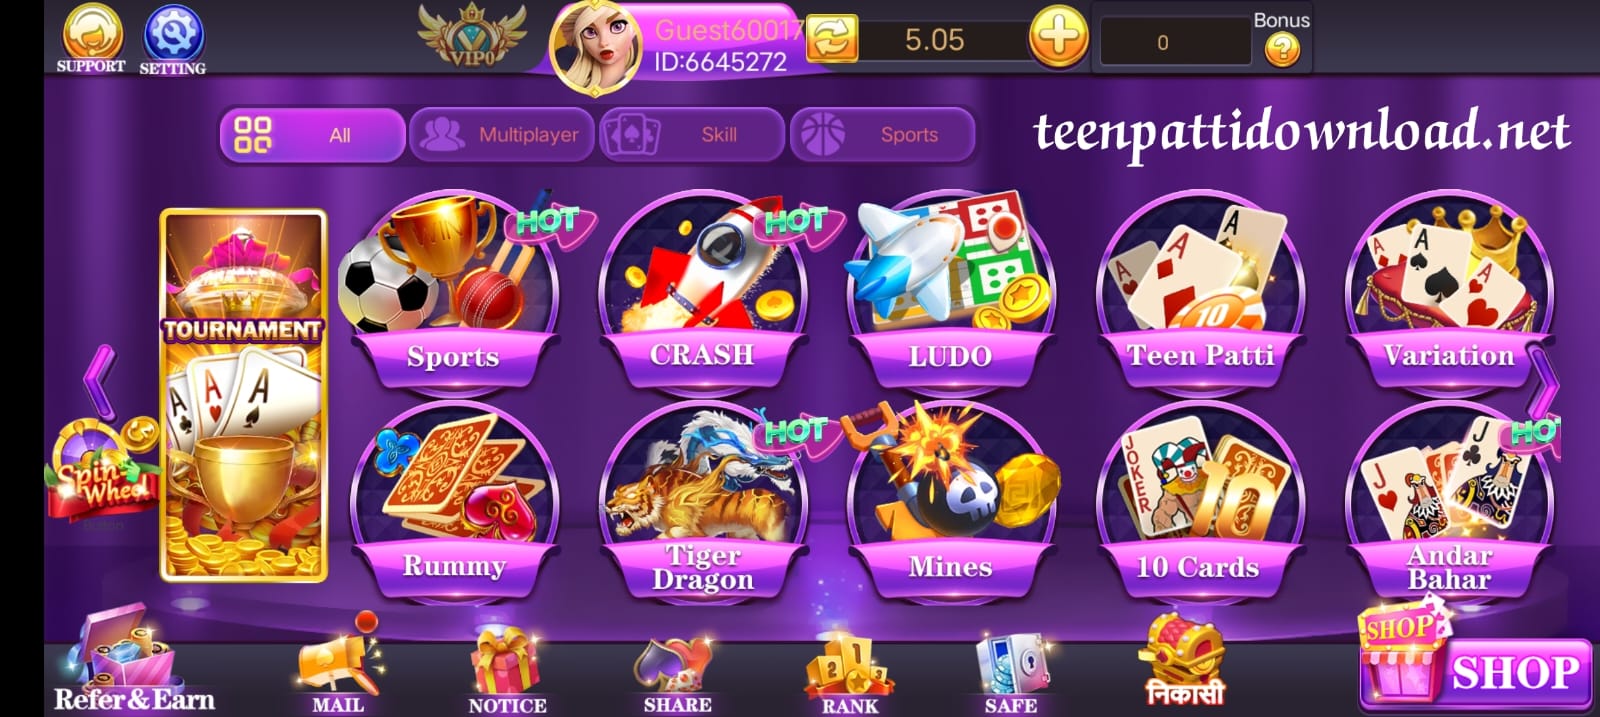 List Of Available All Teen Patti Club Online Games